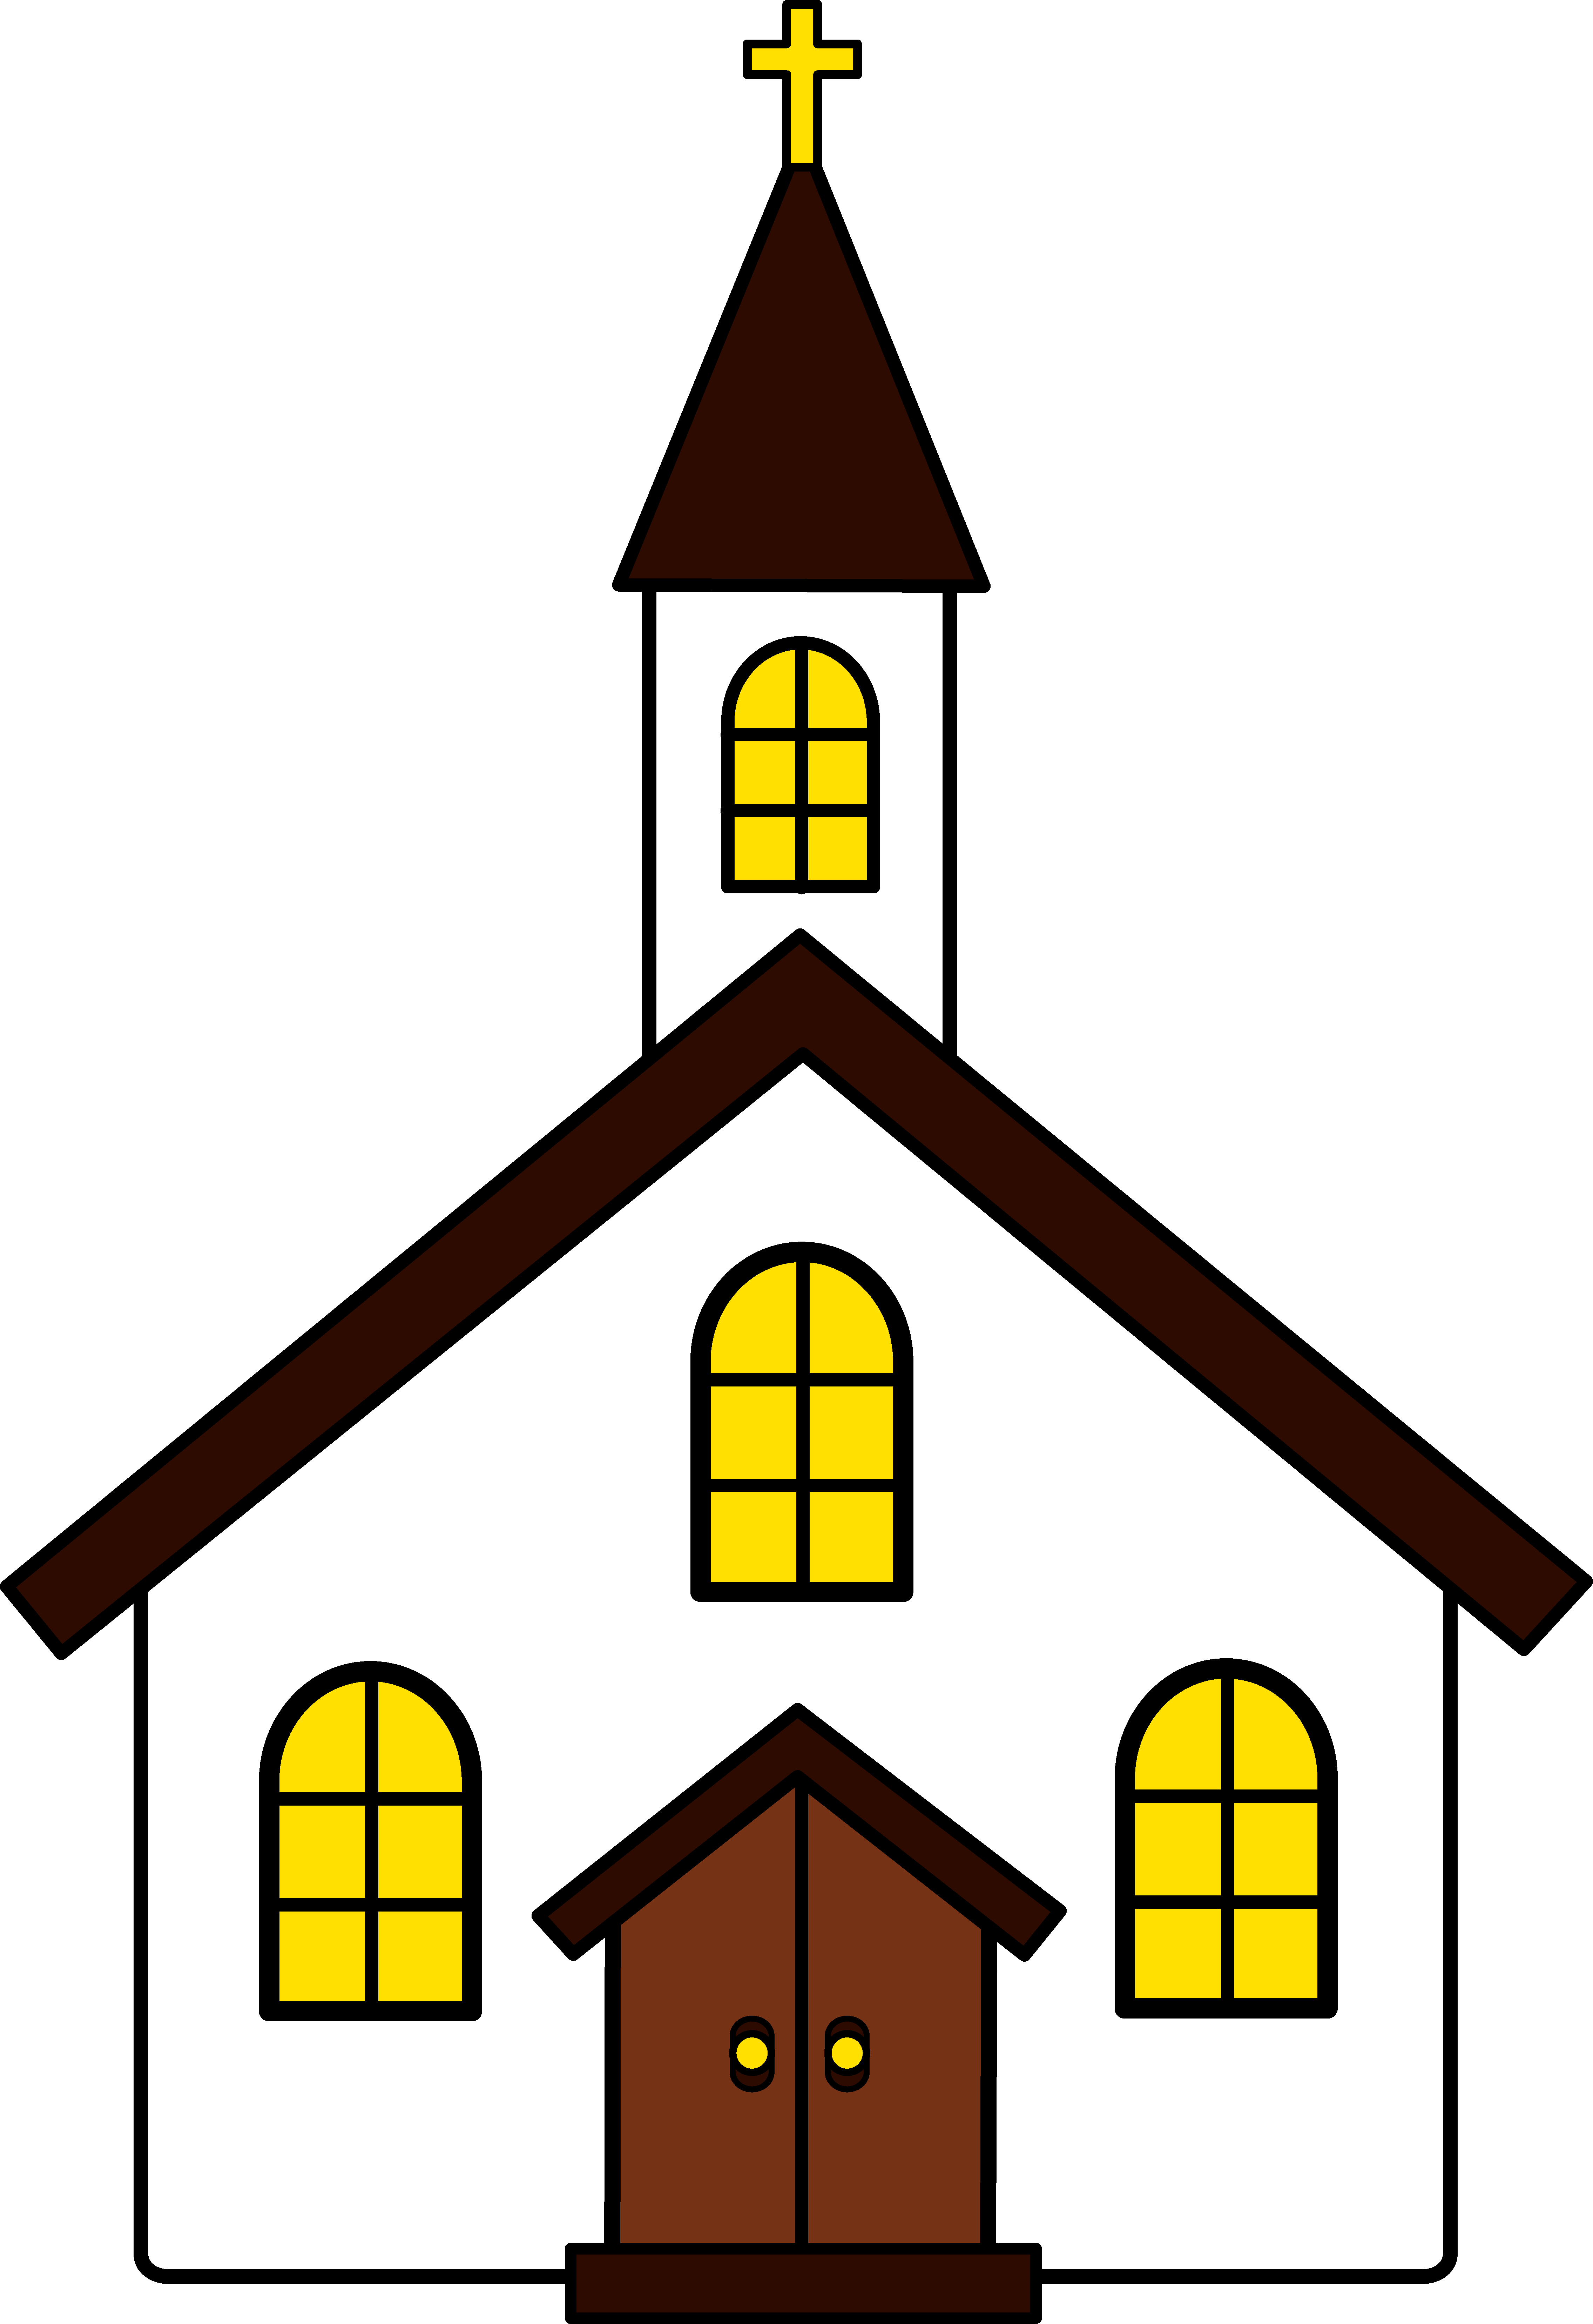 Church Clip Art Black And White | Clipart Panda - Free Clipart Images